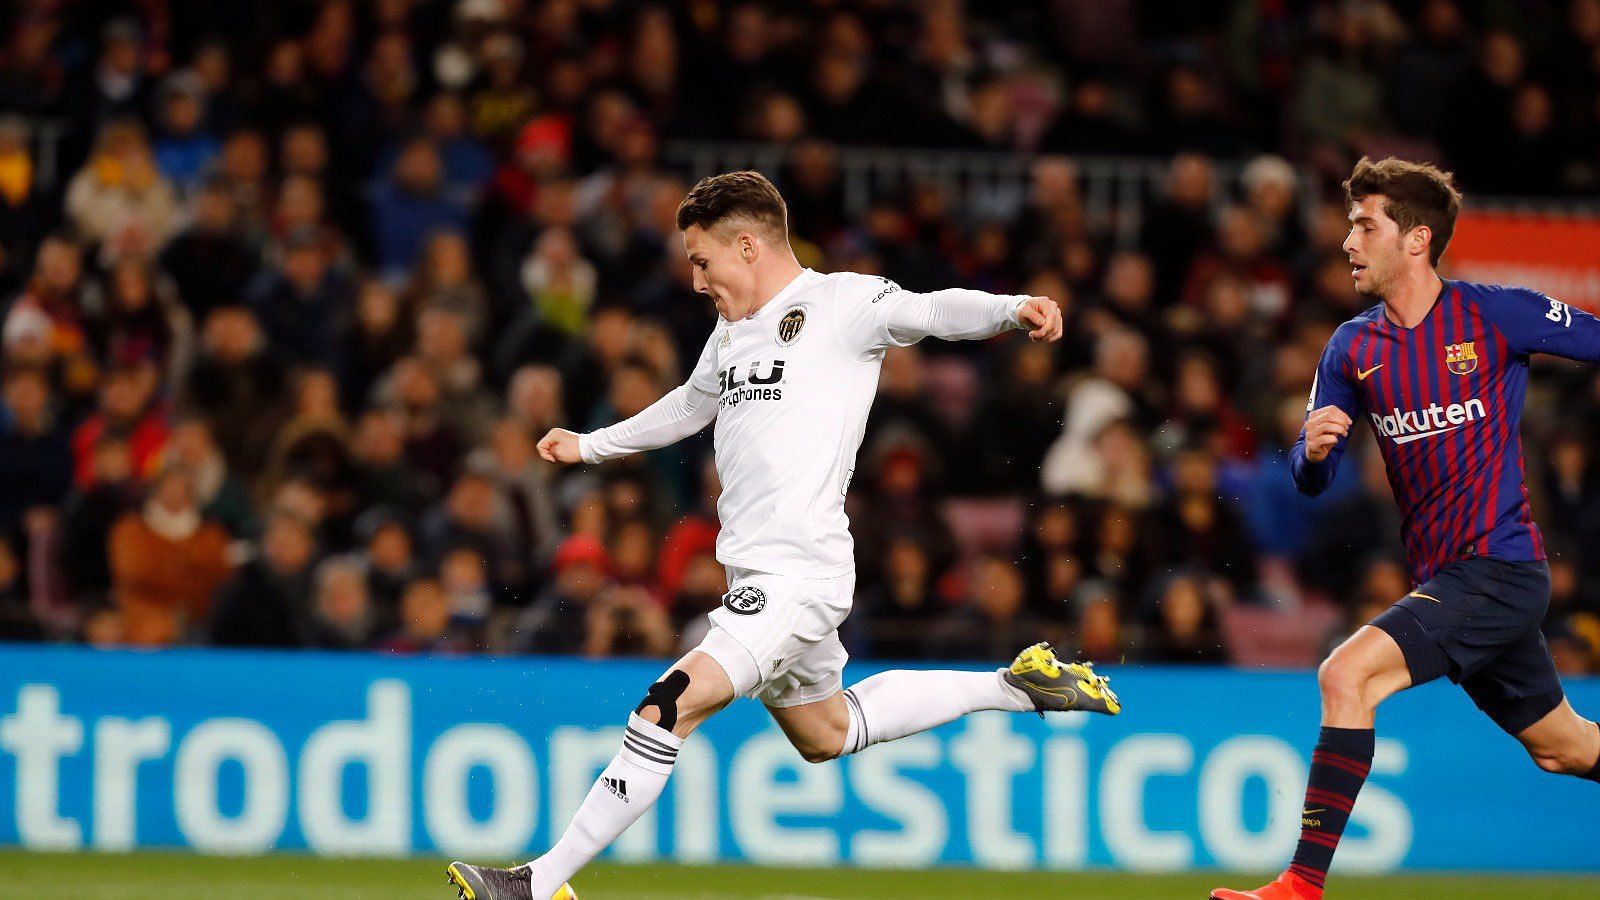 Valencia striker Kevin Gameiro in action during a match against FC Barcelona.